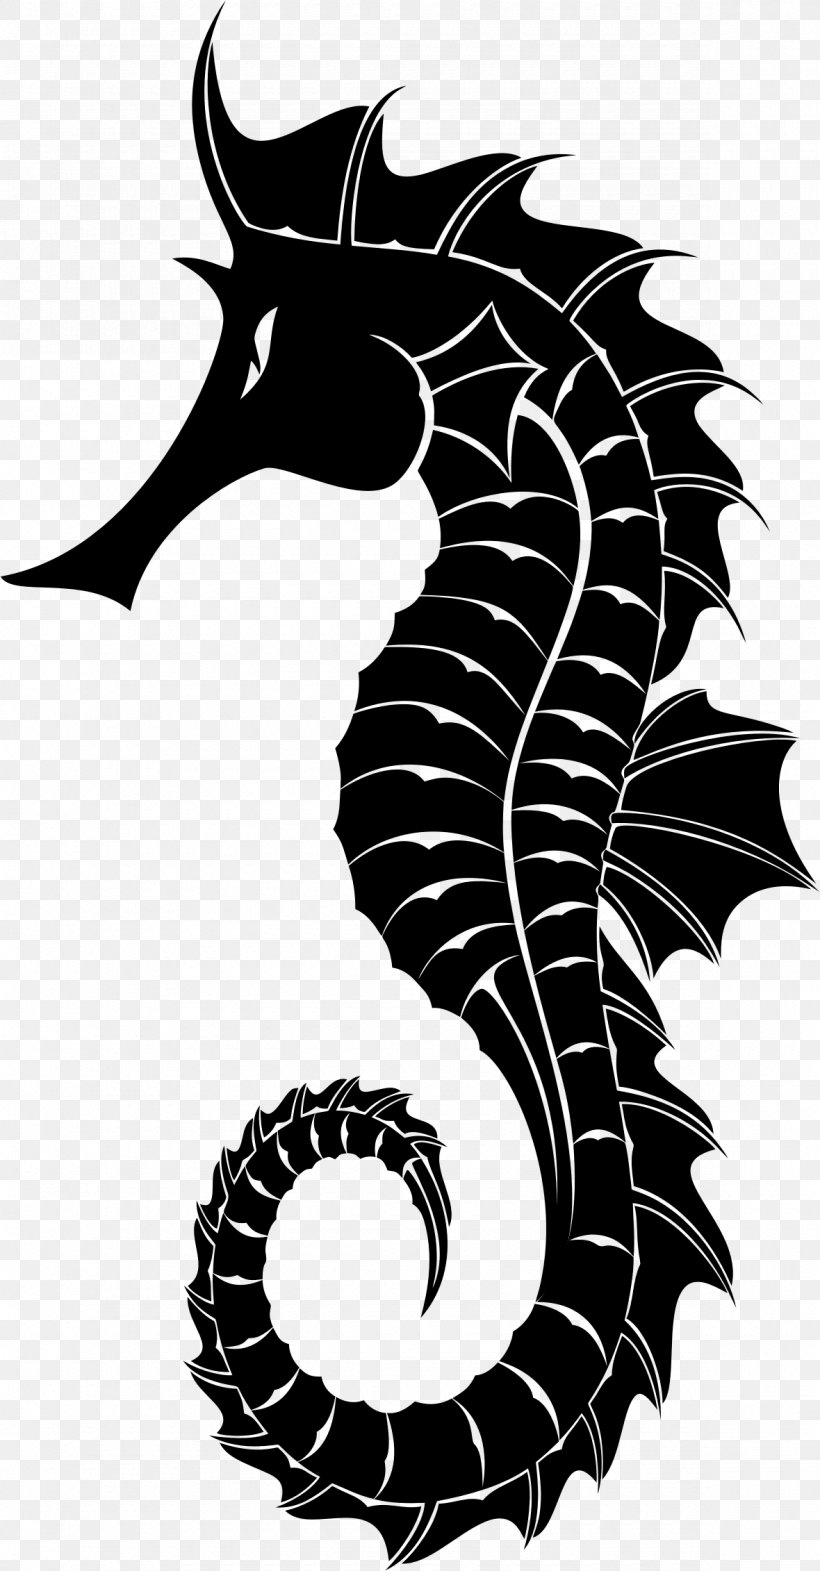 Silhouette Great Seahorse Clip Art, PNG, 1180x2262px, Great Seahorse, Art, Black And White, Illustration, Monochrome Download Free